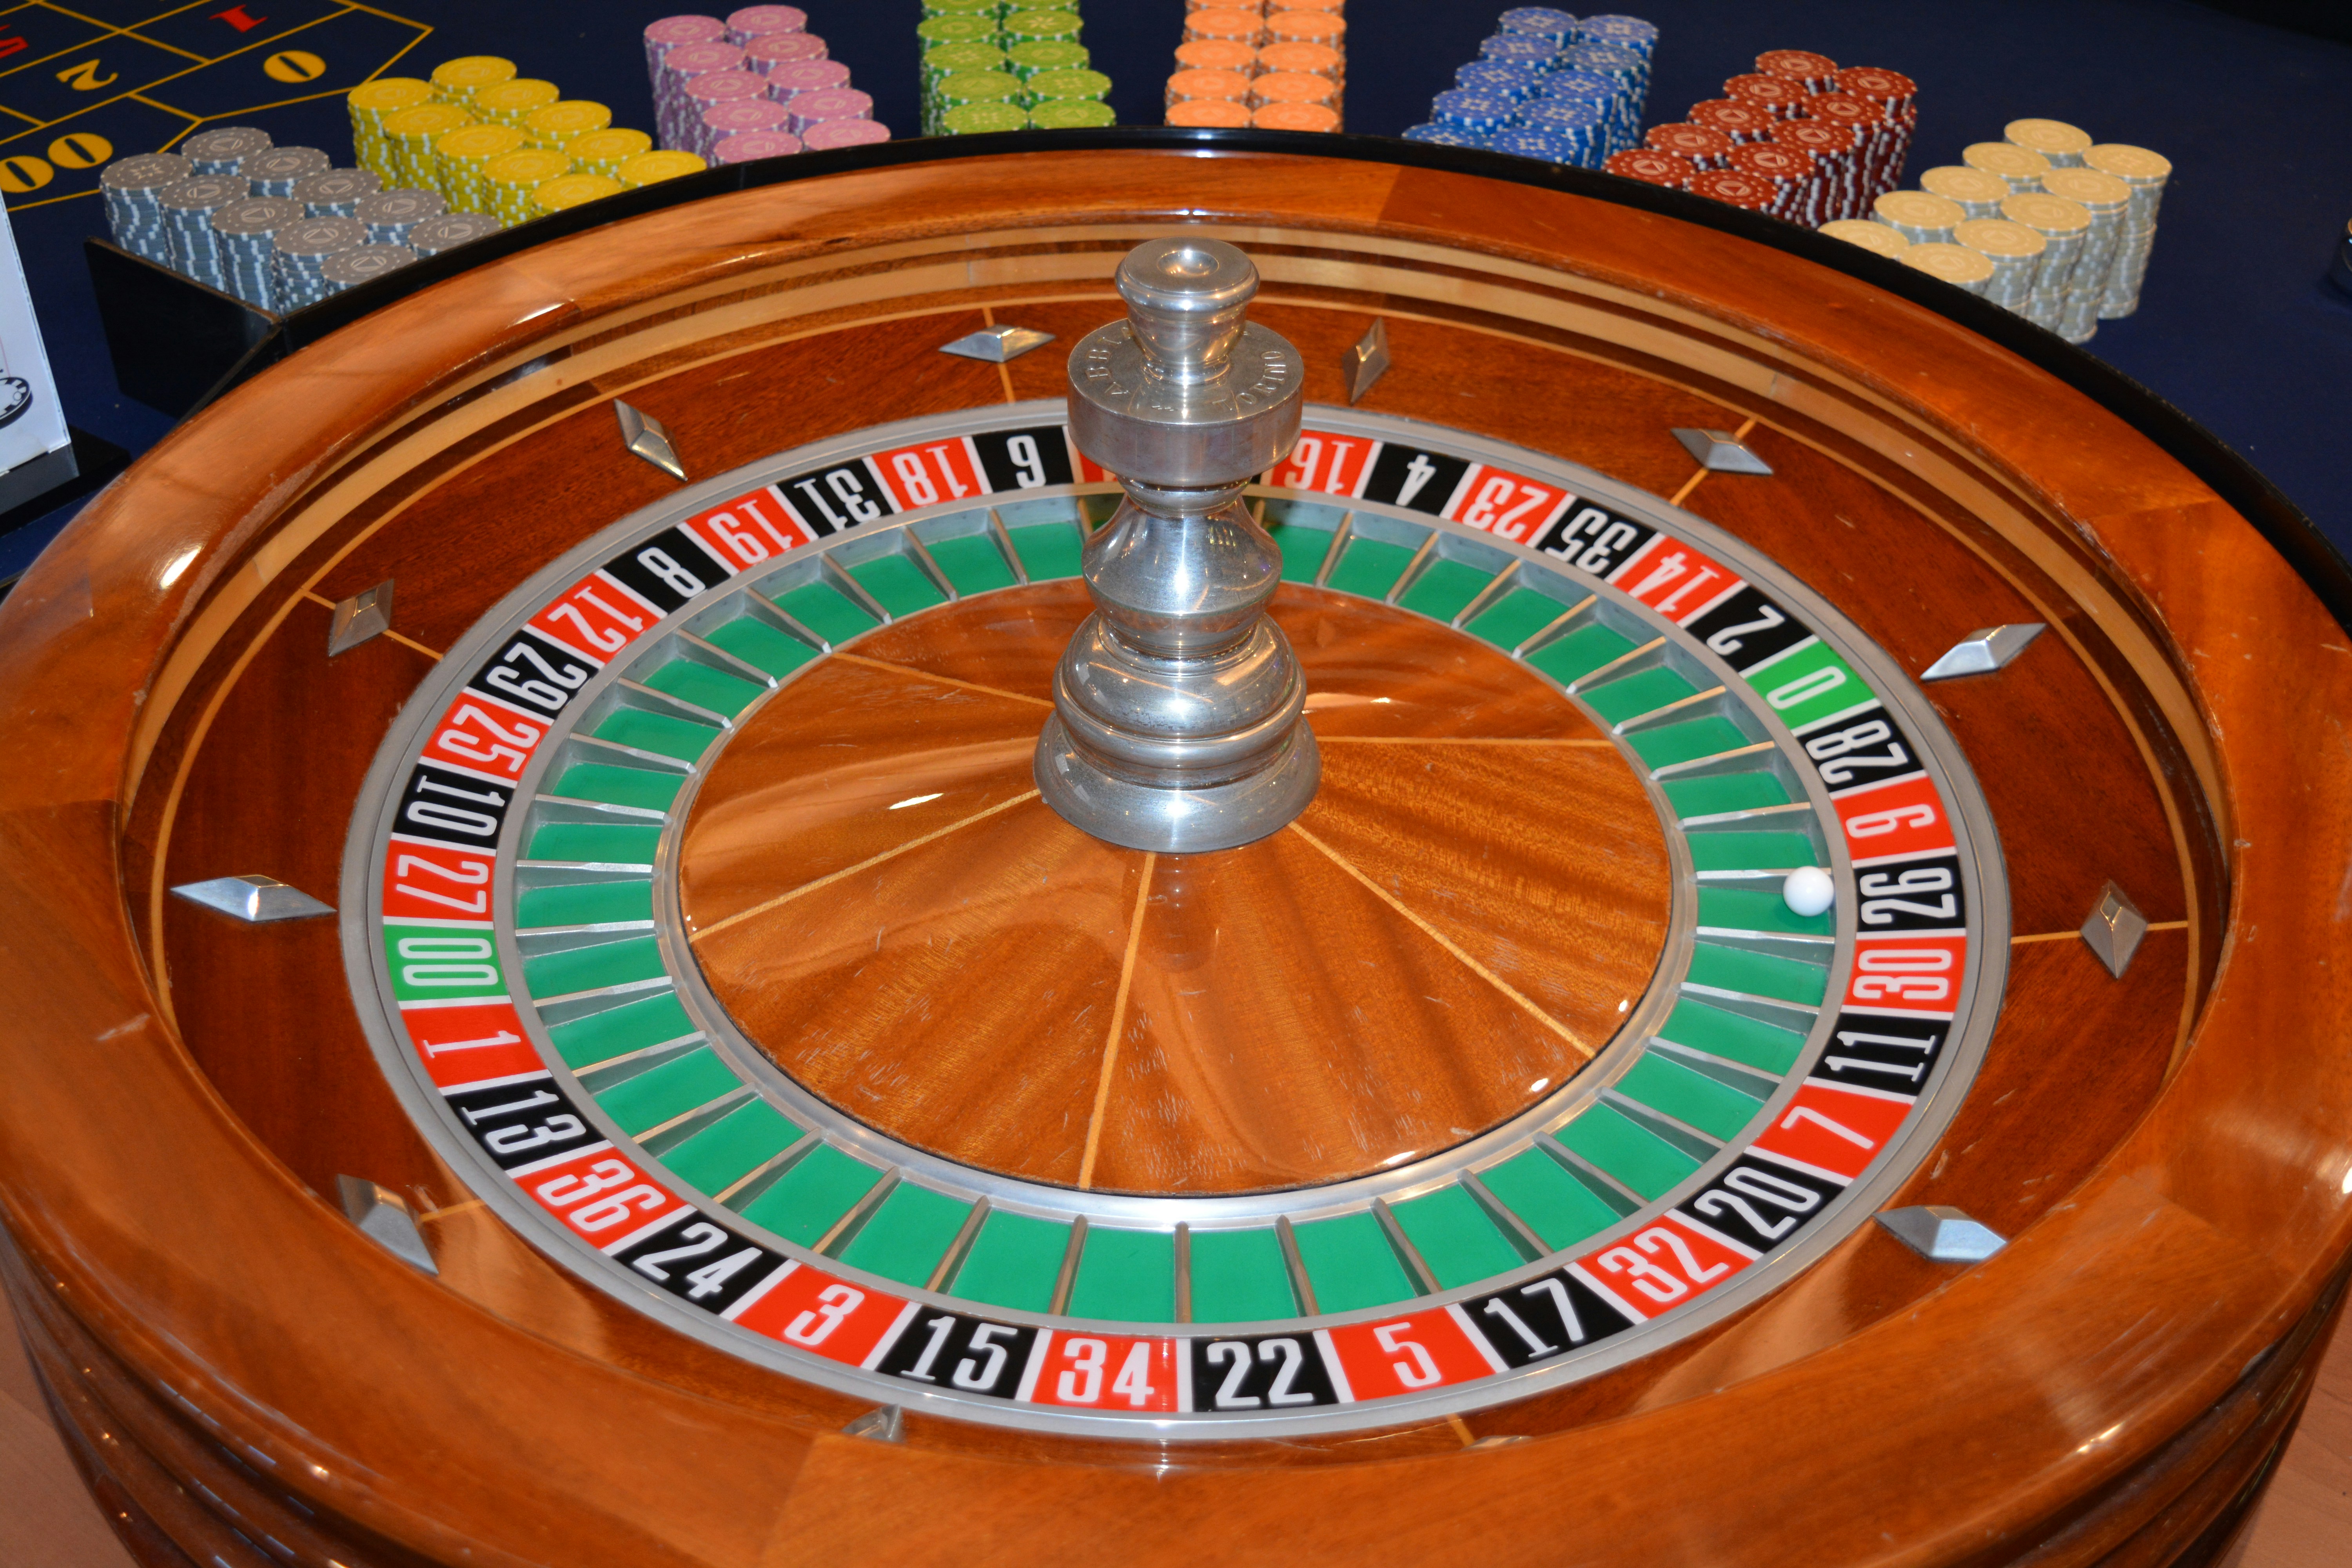 Roulette wheel in a casino for gambling entertainment